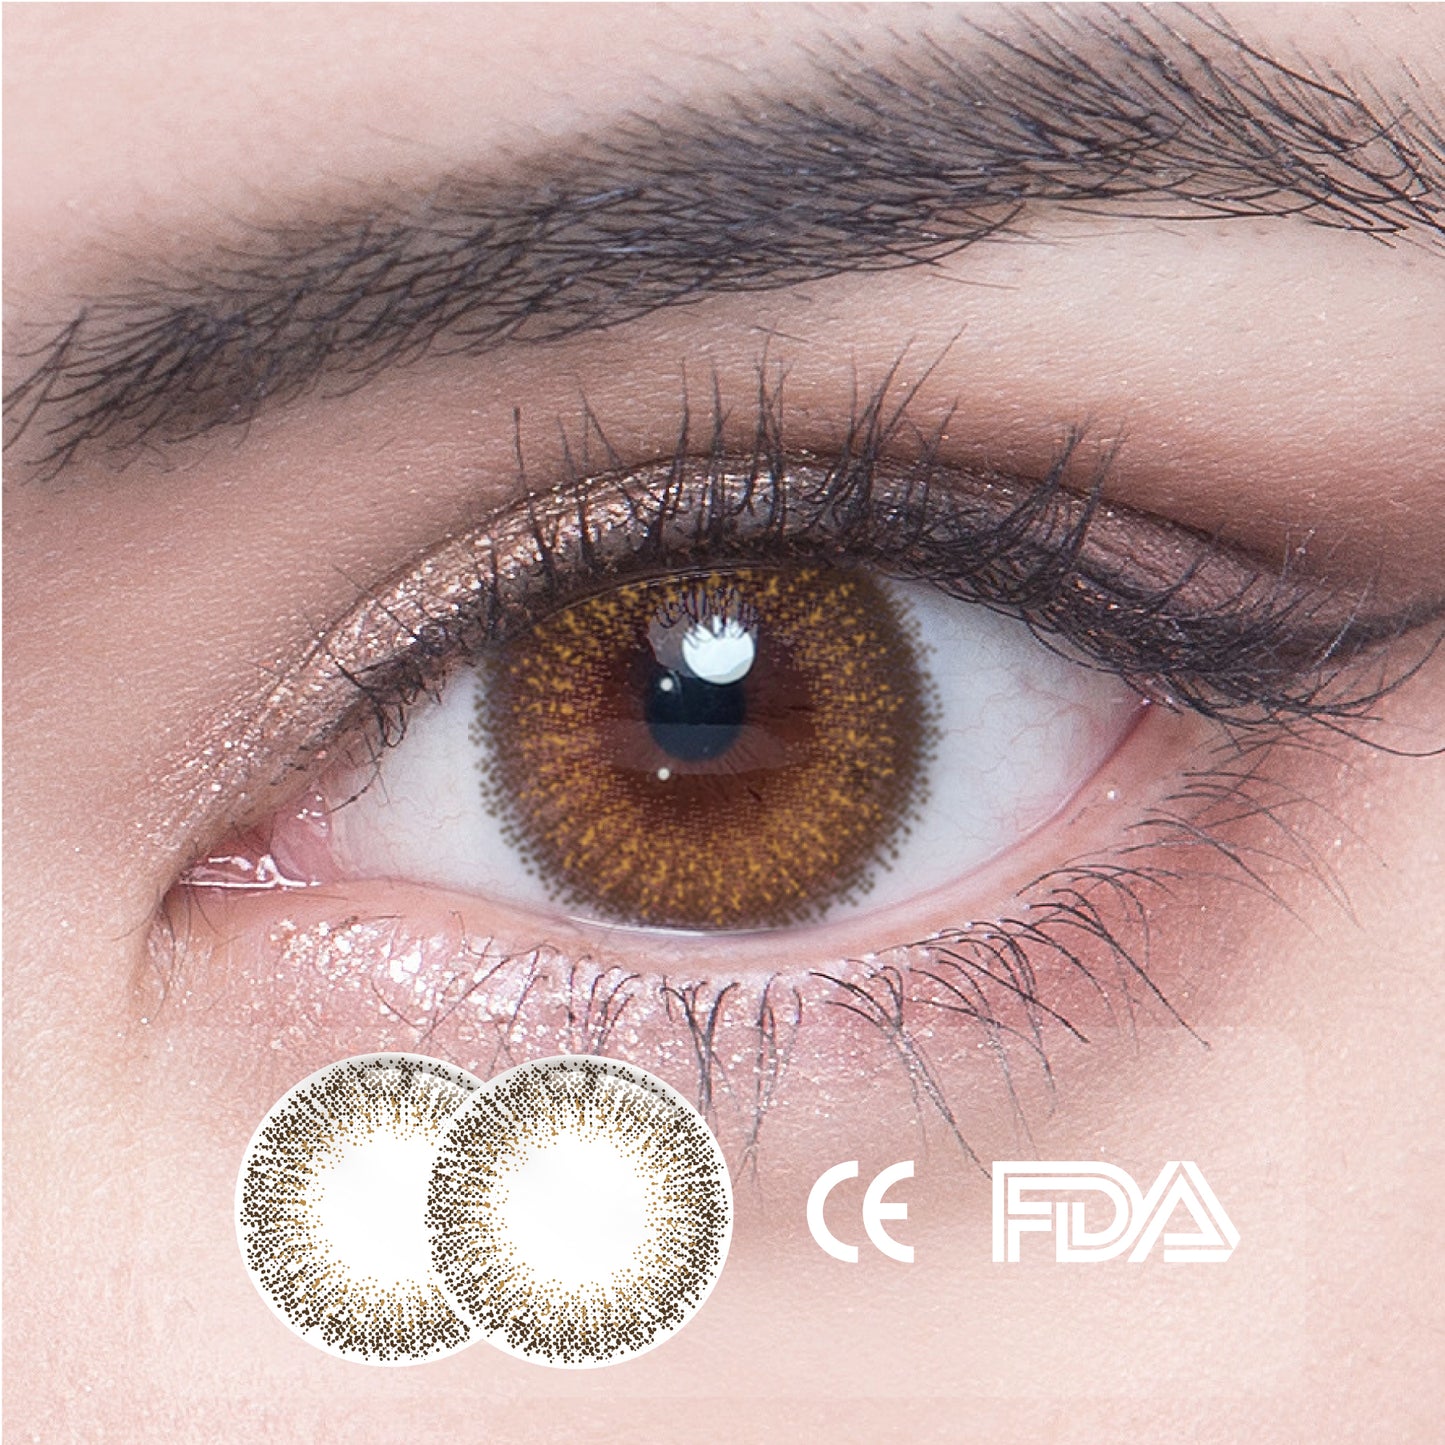  1Pcs FDA Certificate Eyes Colorful Contact Lenses - Babysbreath brown